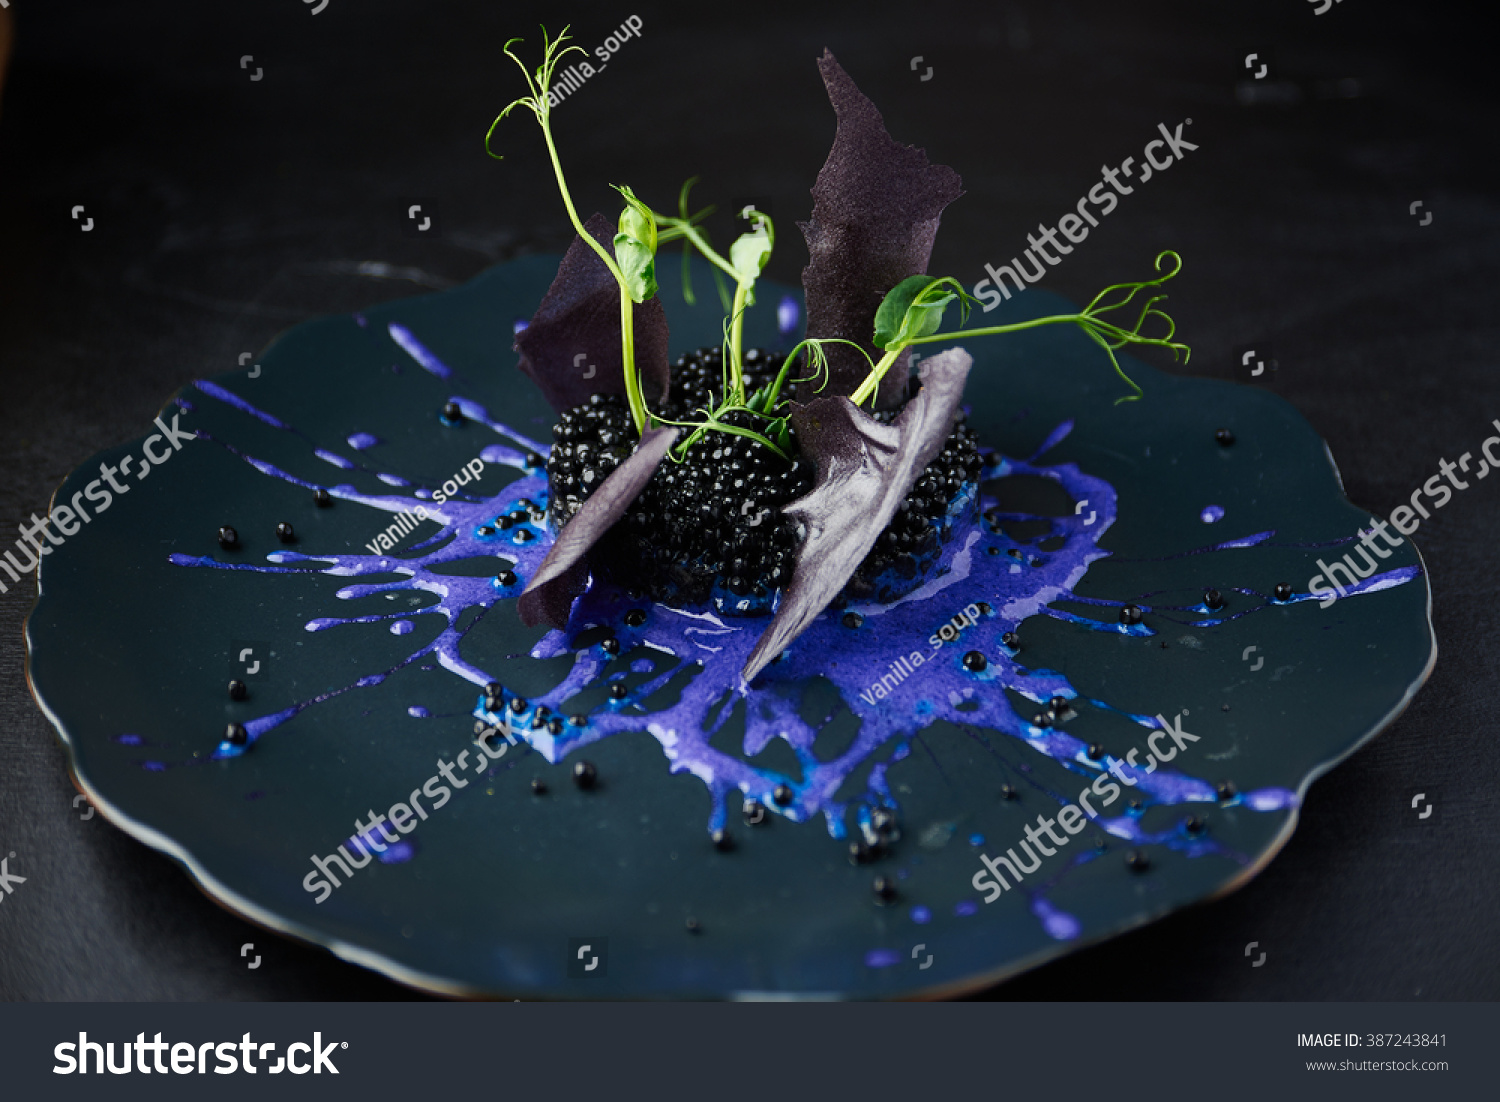 Plate with black risotto on black background with dramatic side light. Haute cuisine. #387243841